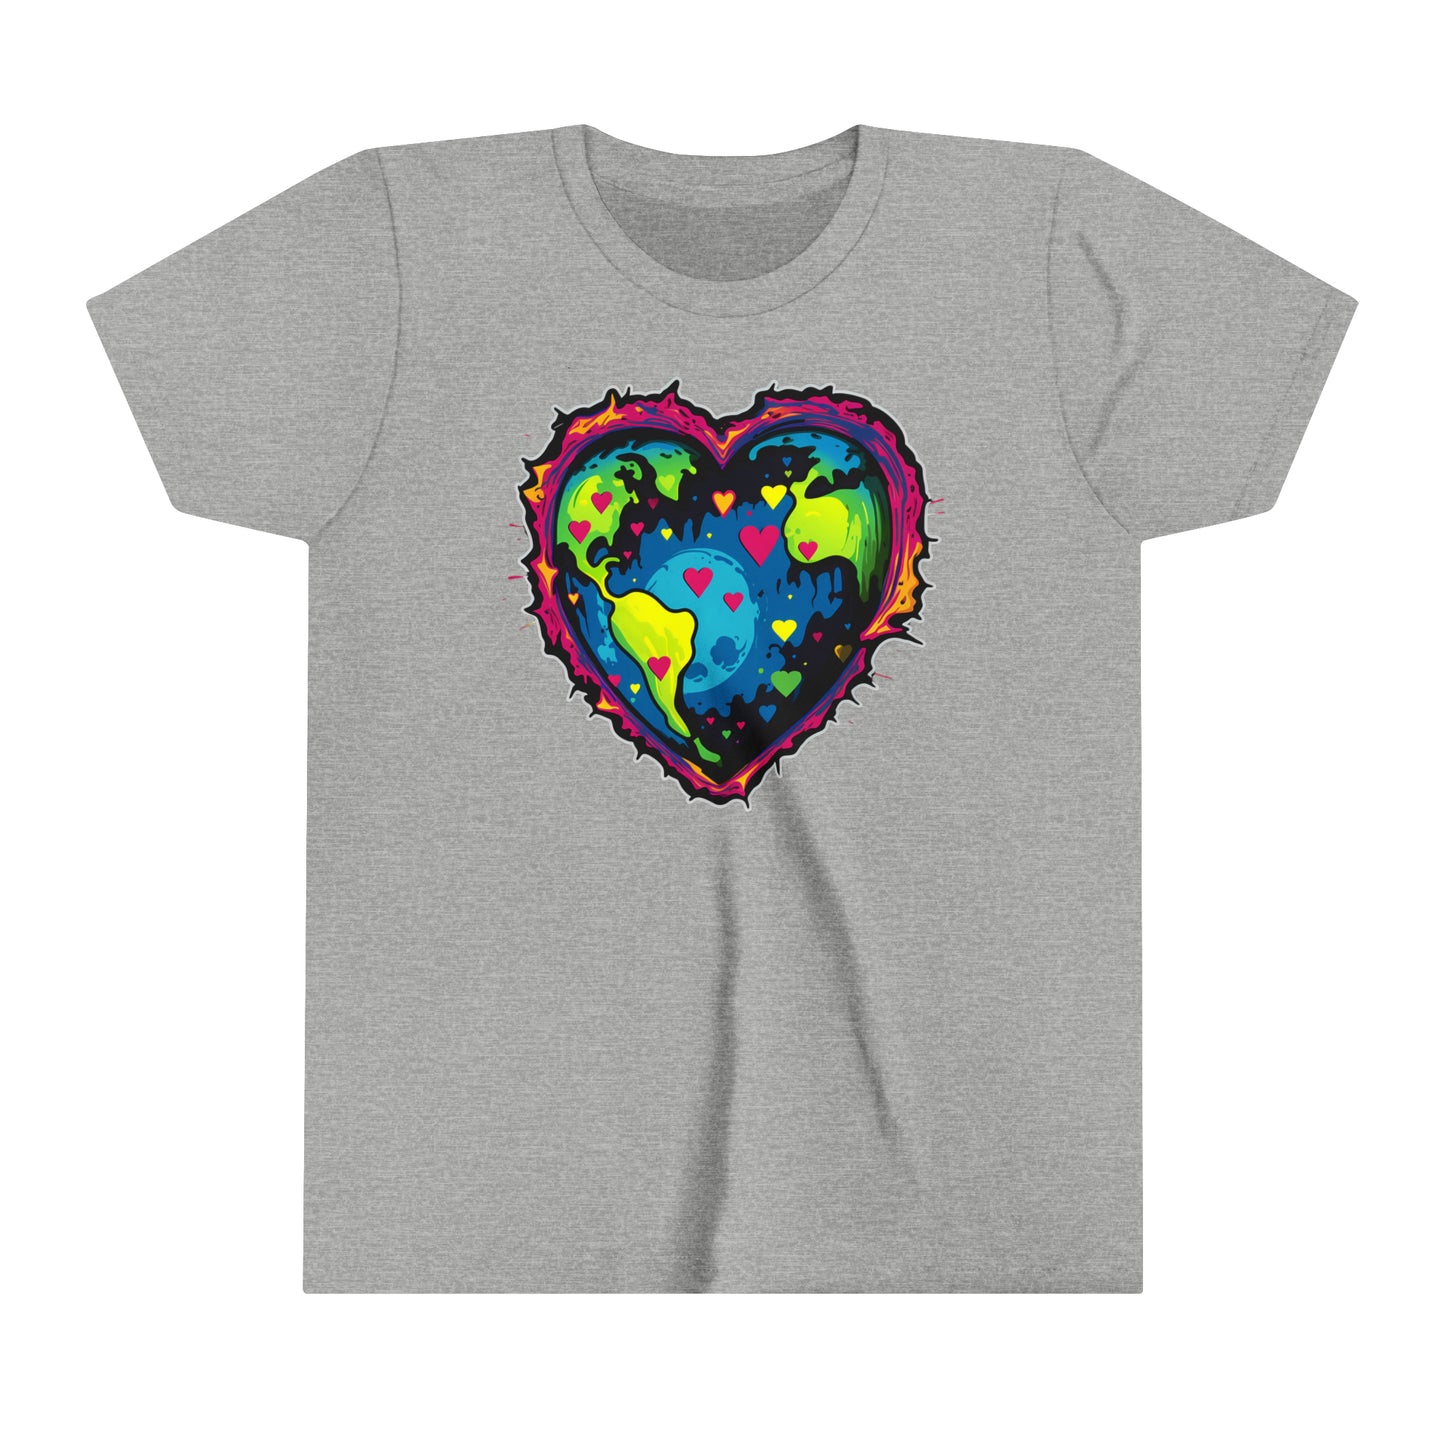 Neon 80's Earth T-Shirt - Youth